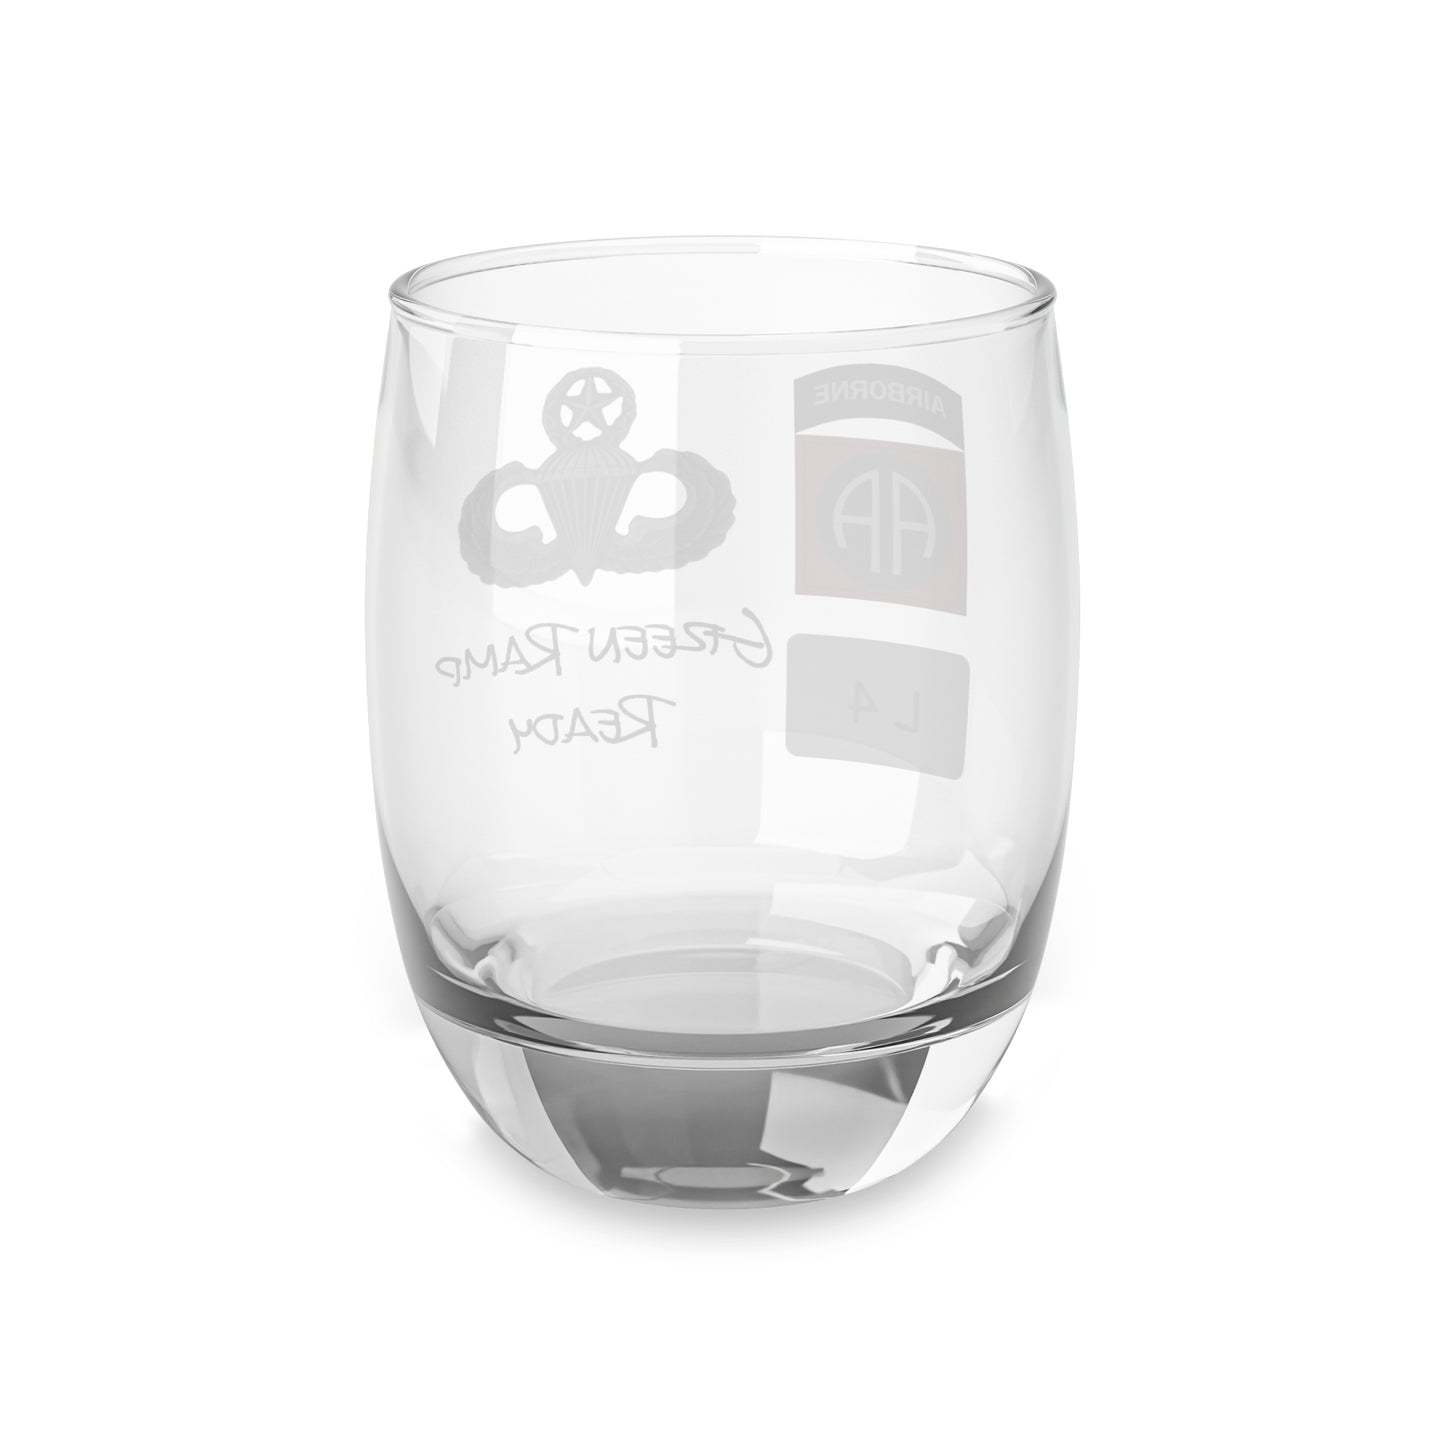 Green Ramp Ready Master Wing Whiskey Glass Jumper L4